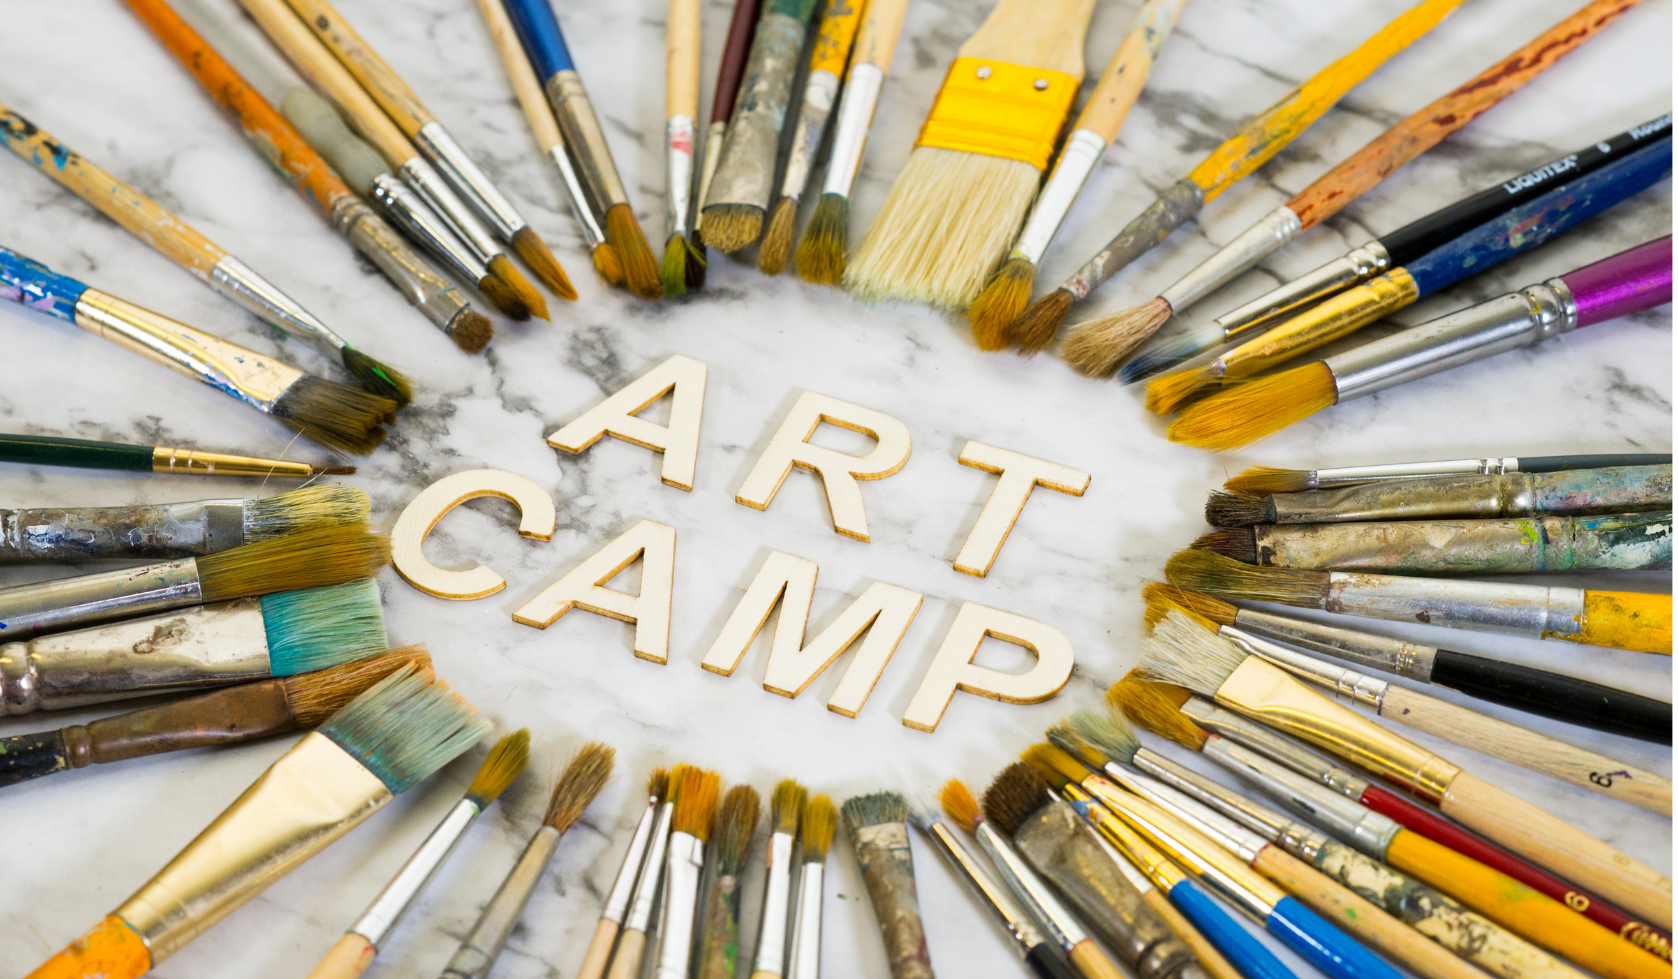 "Art Camp" surrounded by paint brushes.